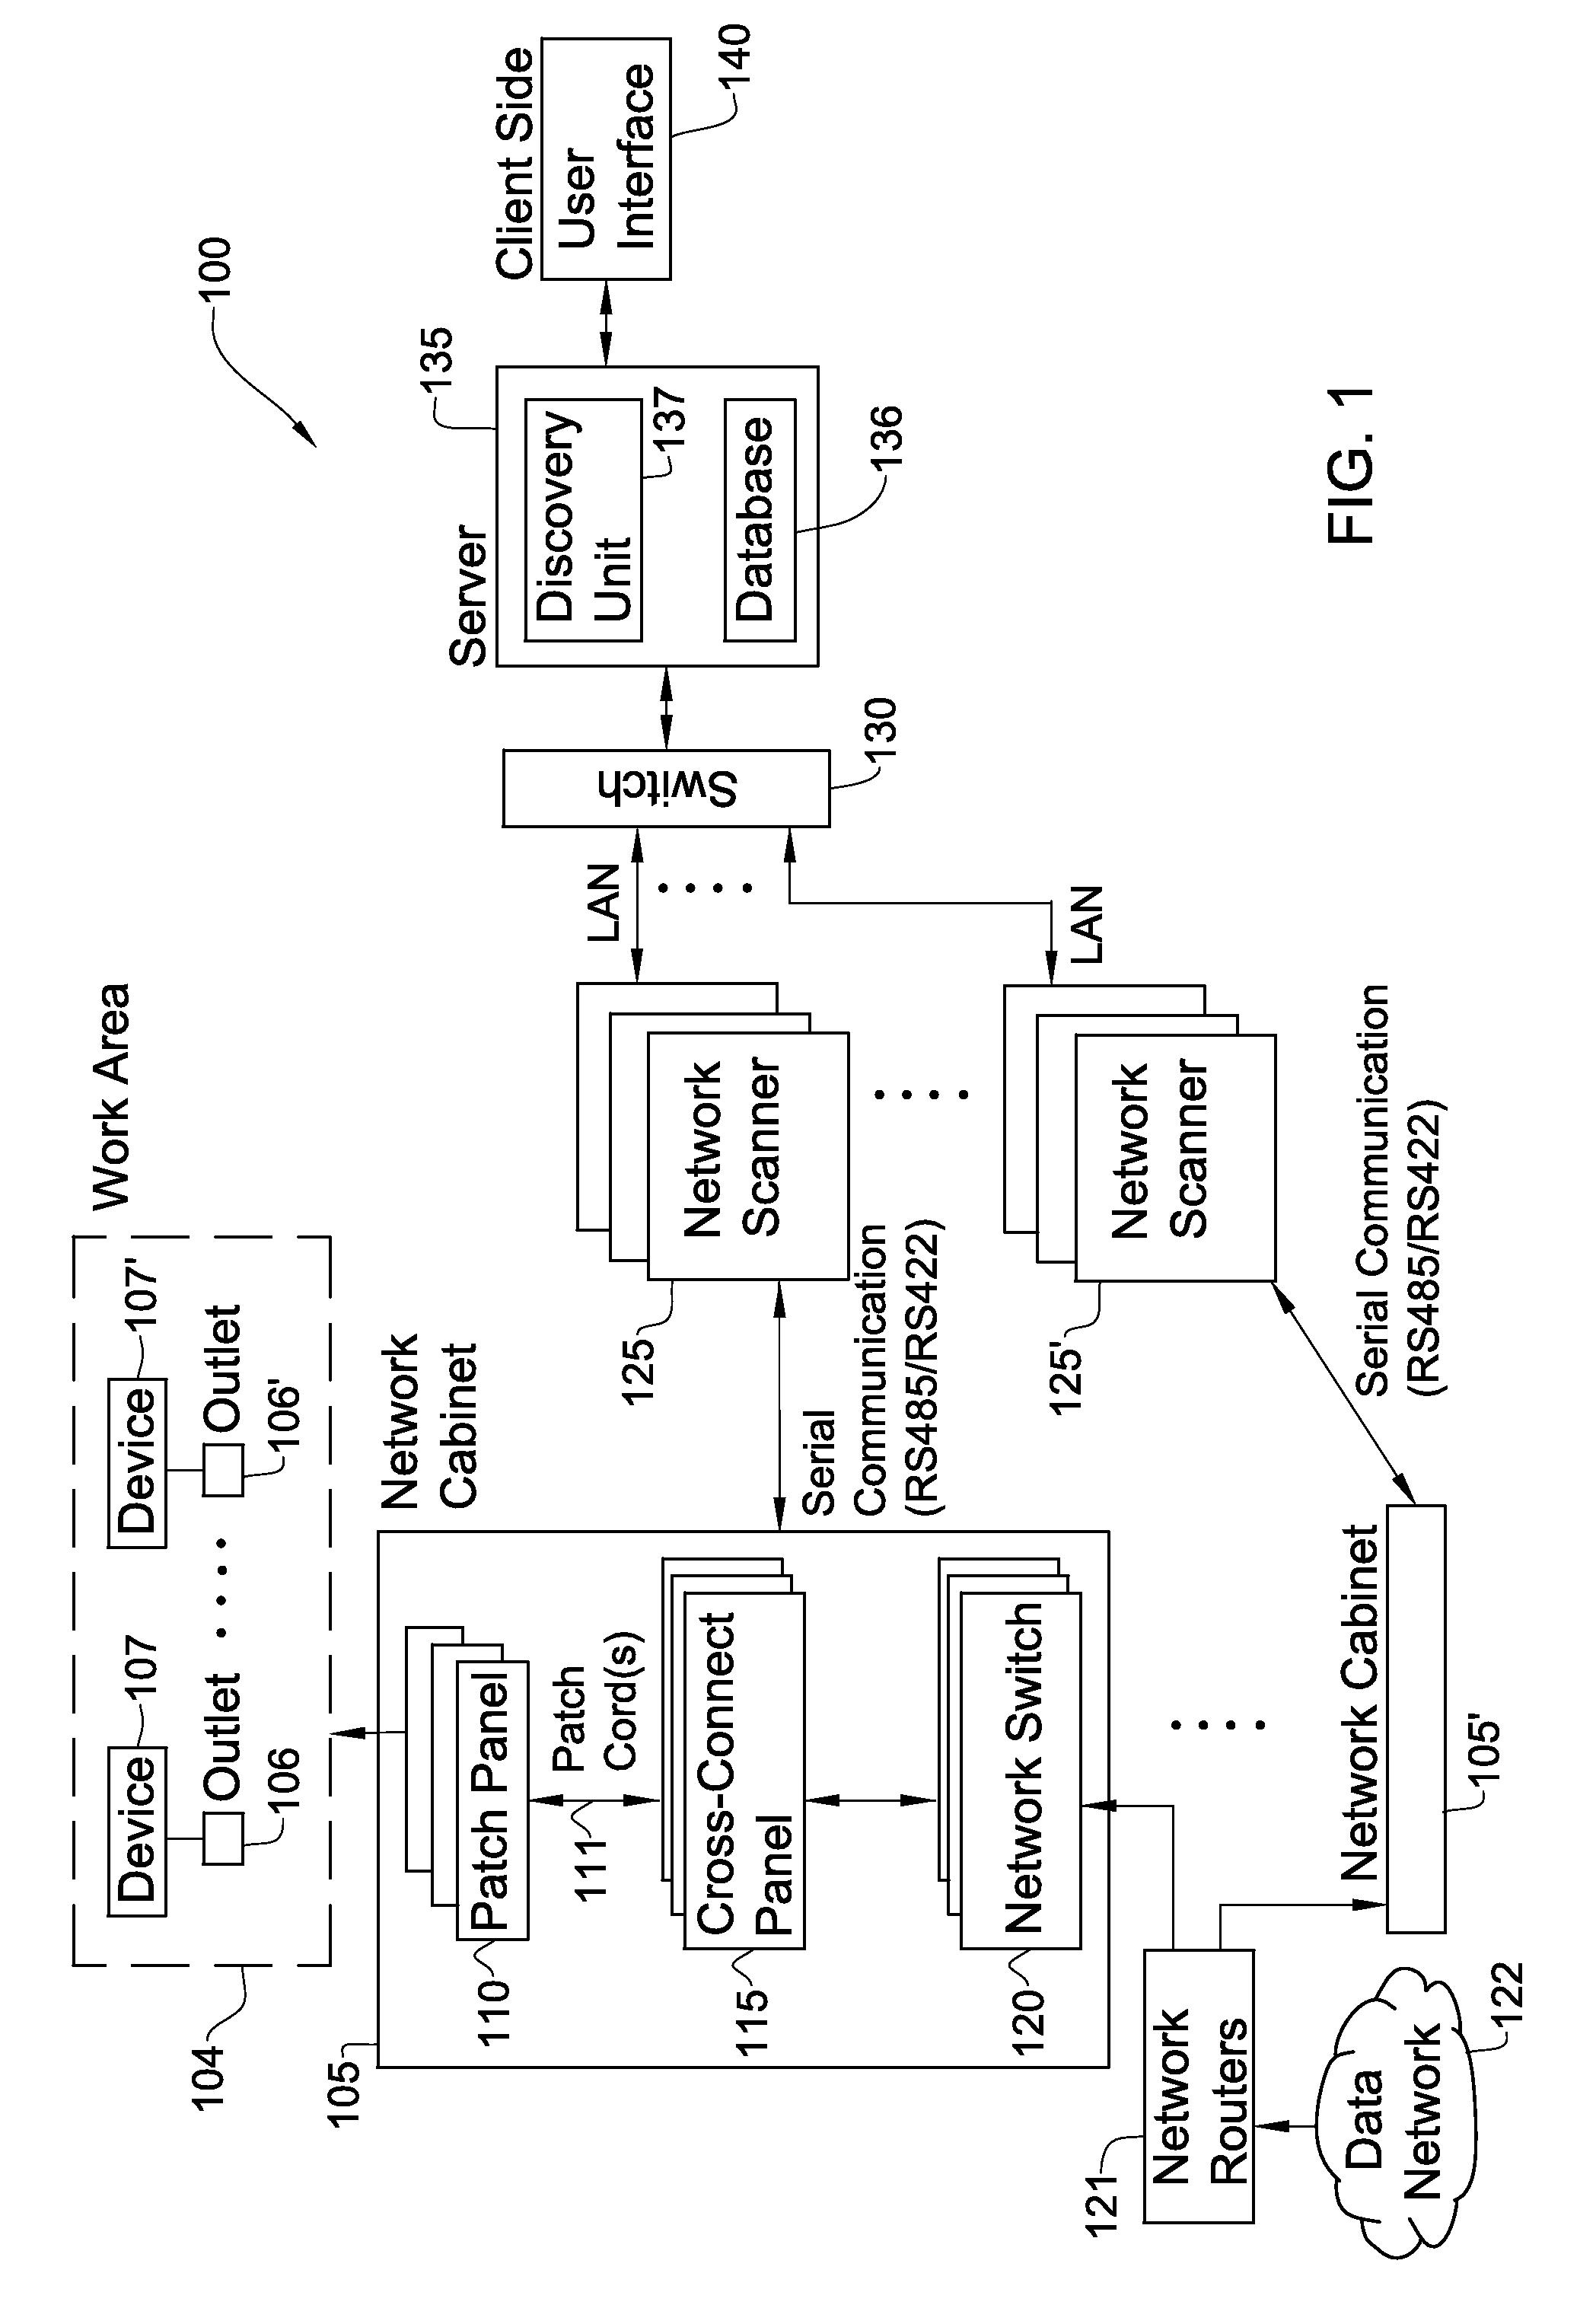 Cabling system and method for monitoring and managing physically connected devices over a data network